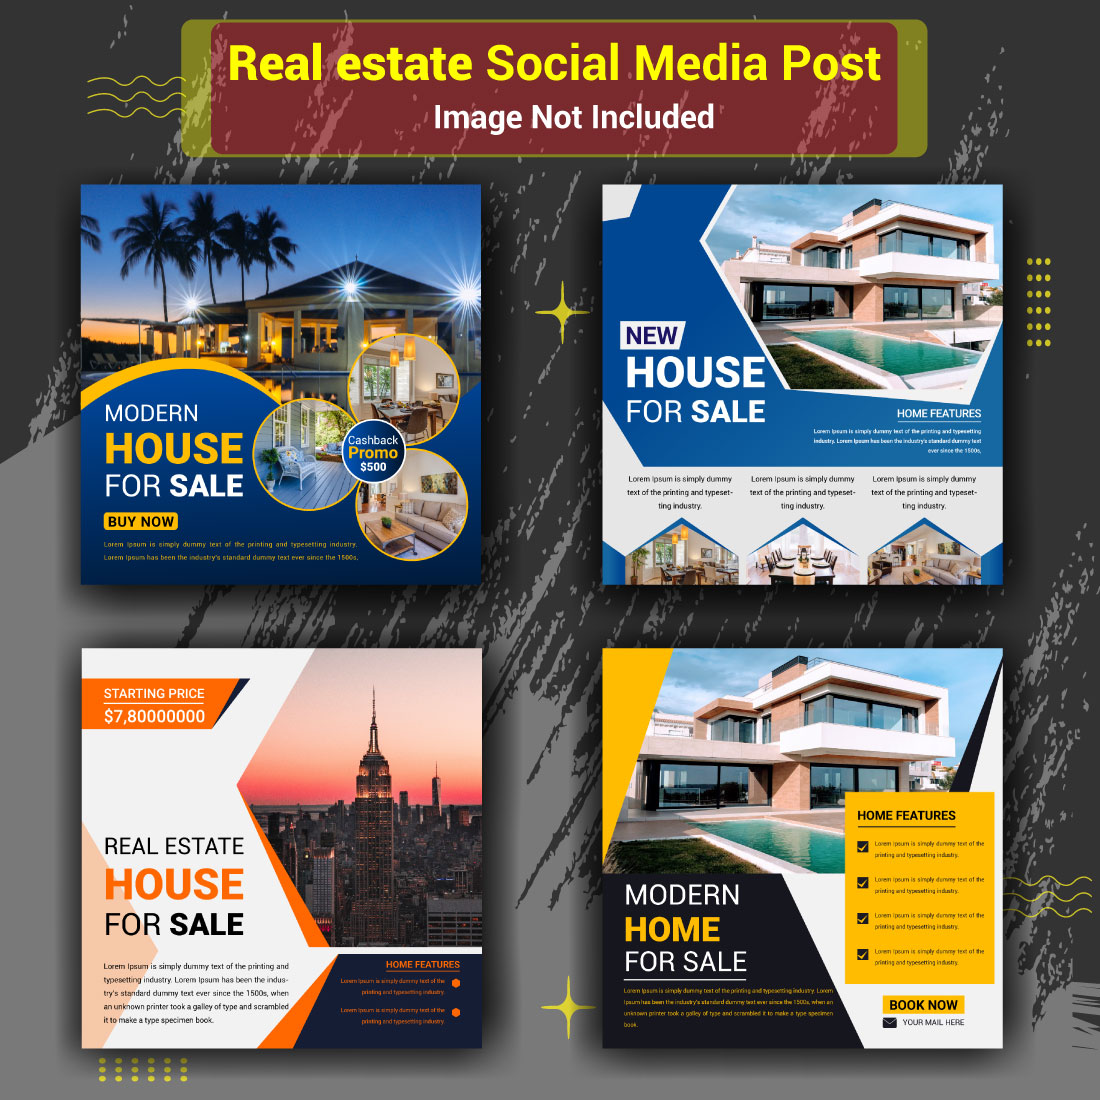 Real estate house social media post And Web banner template Design cover image.